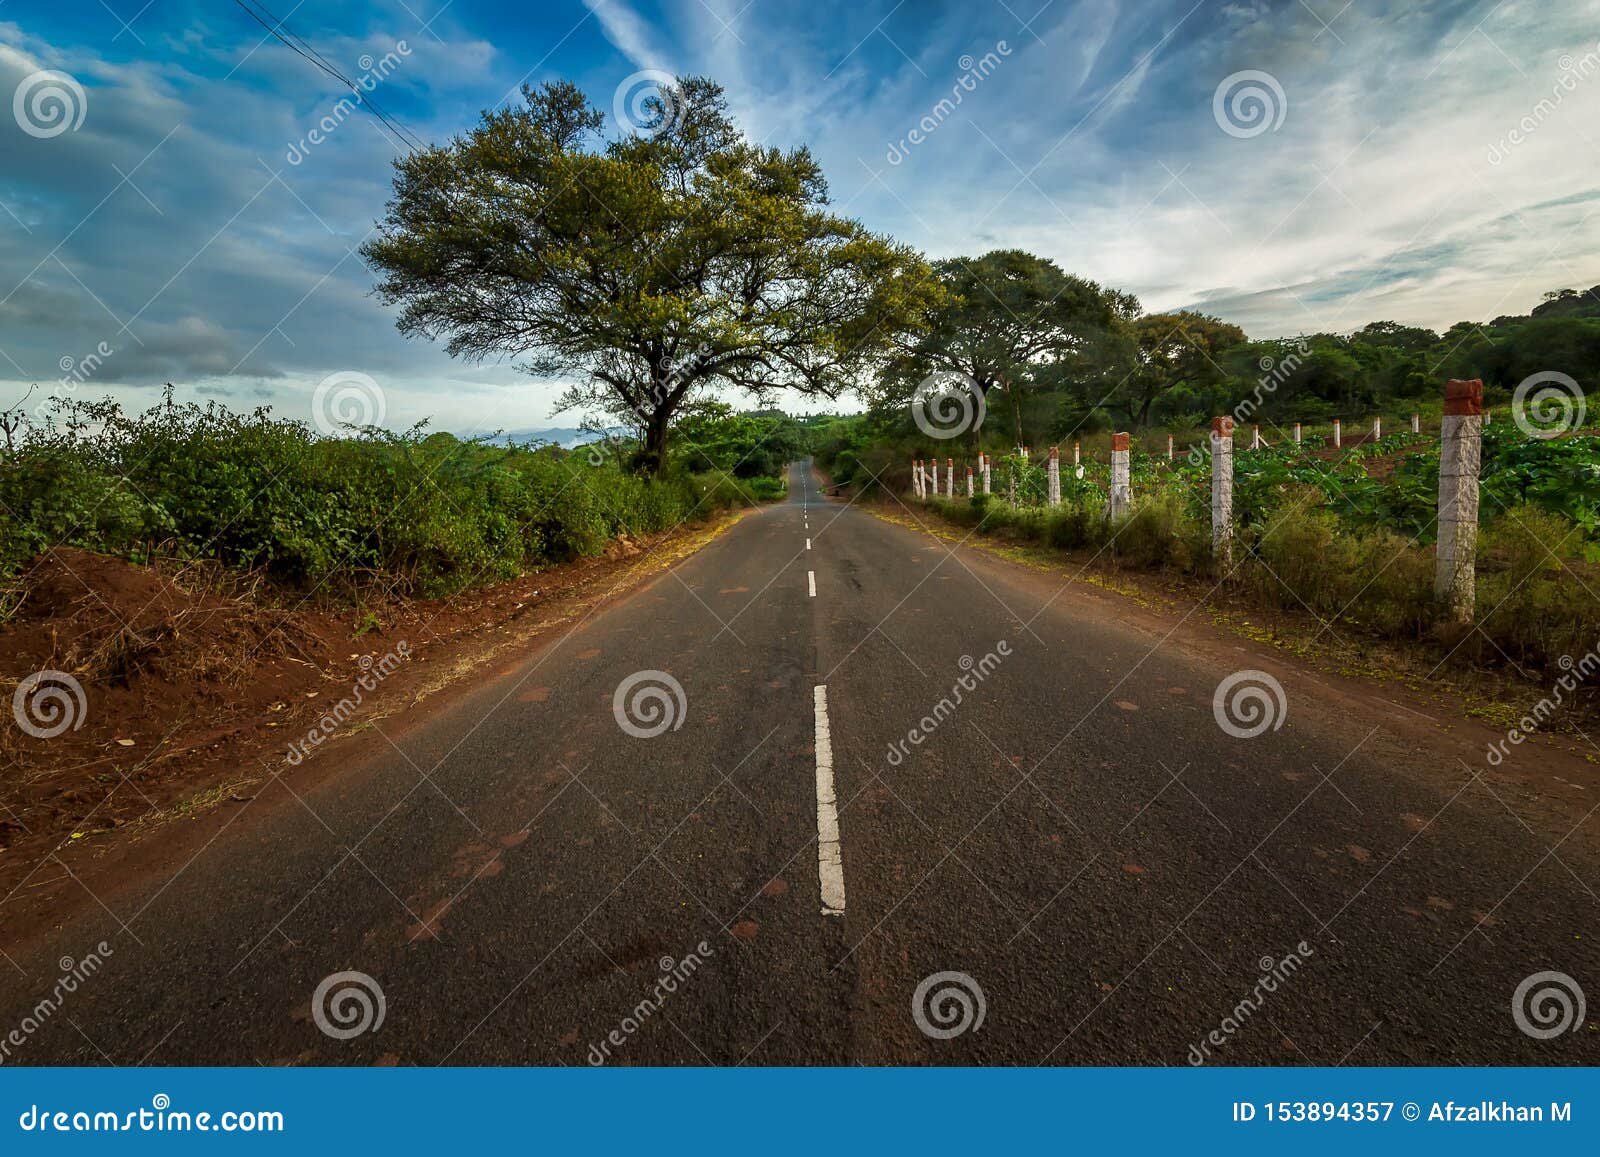 Road With Trees At Both Side Coimbatore Tamil Nadu India Stock Image